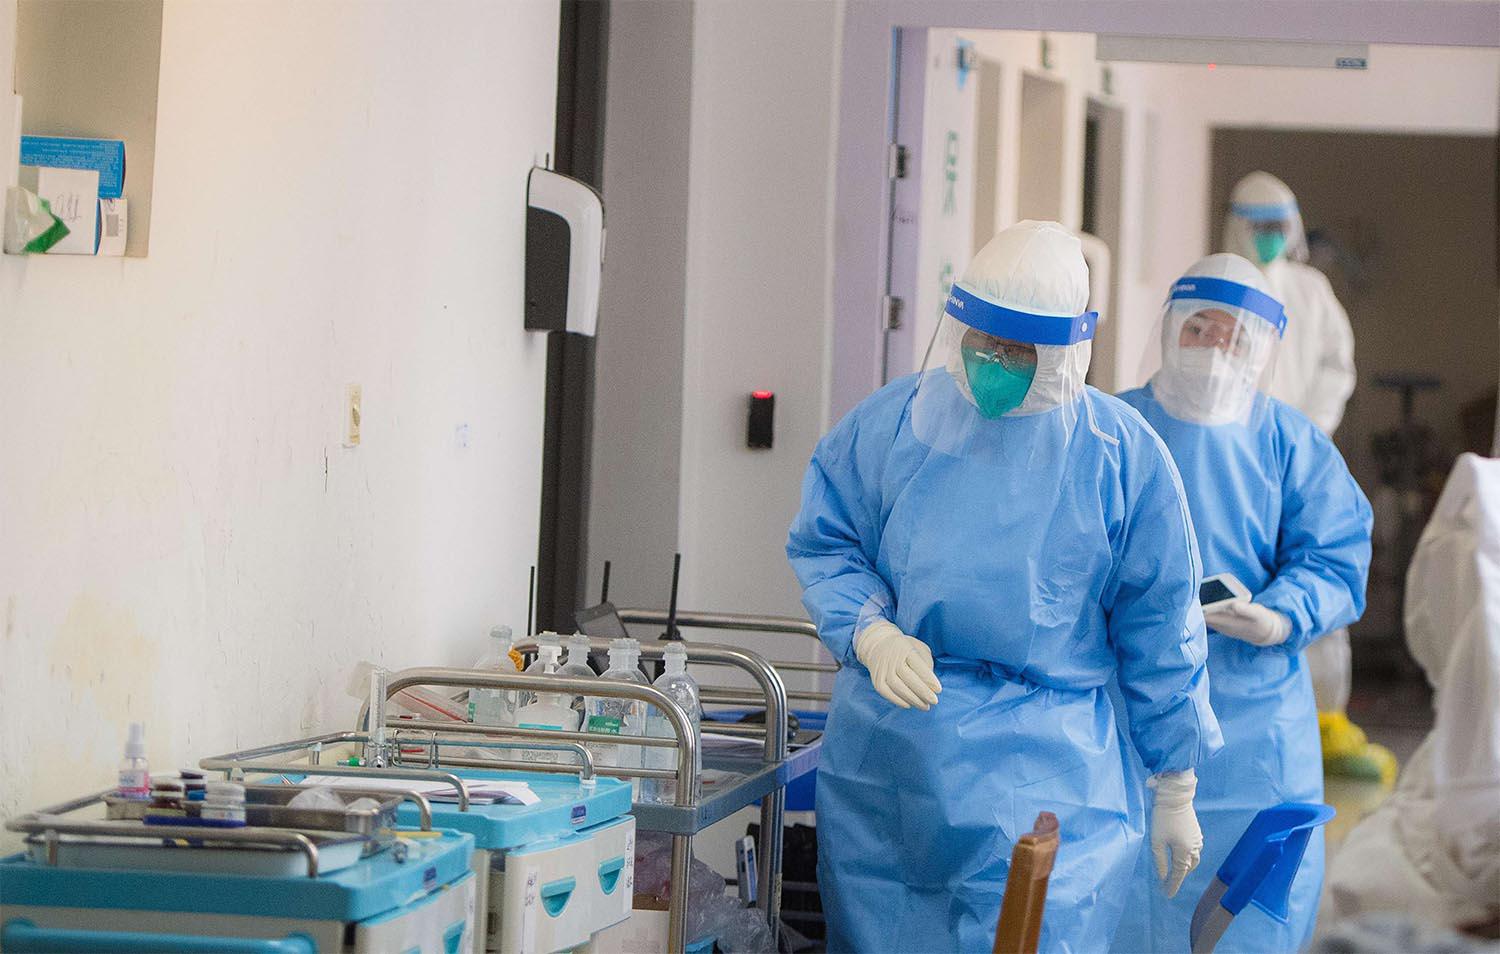 Medical personnel wearing protective suits work in the department of infectious diseases at Wuhan Union Hospital in Wuhan